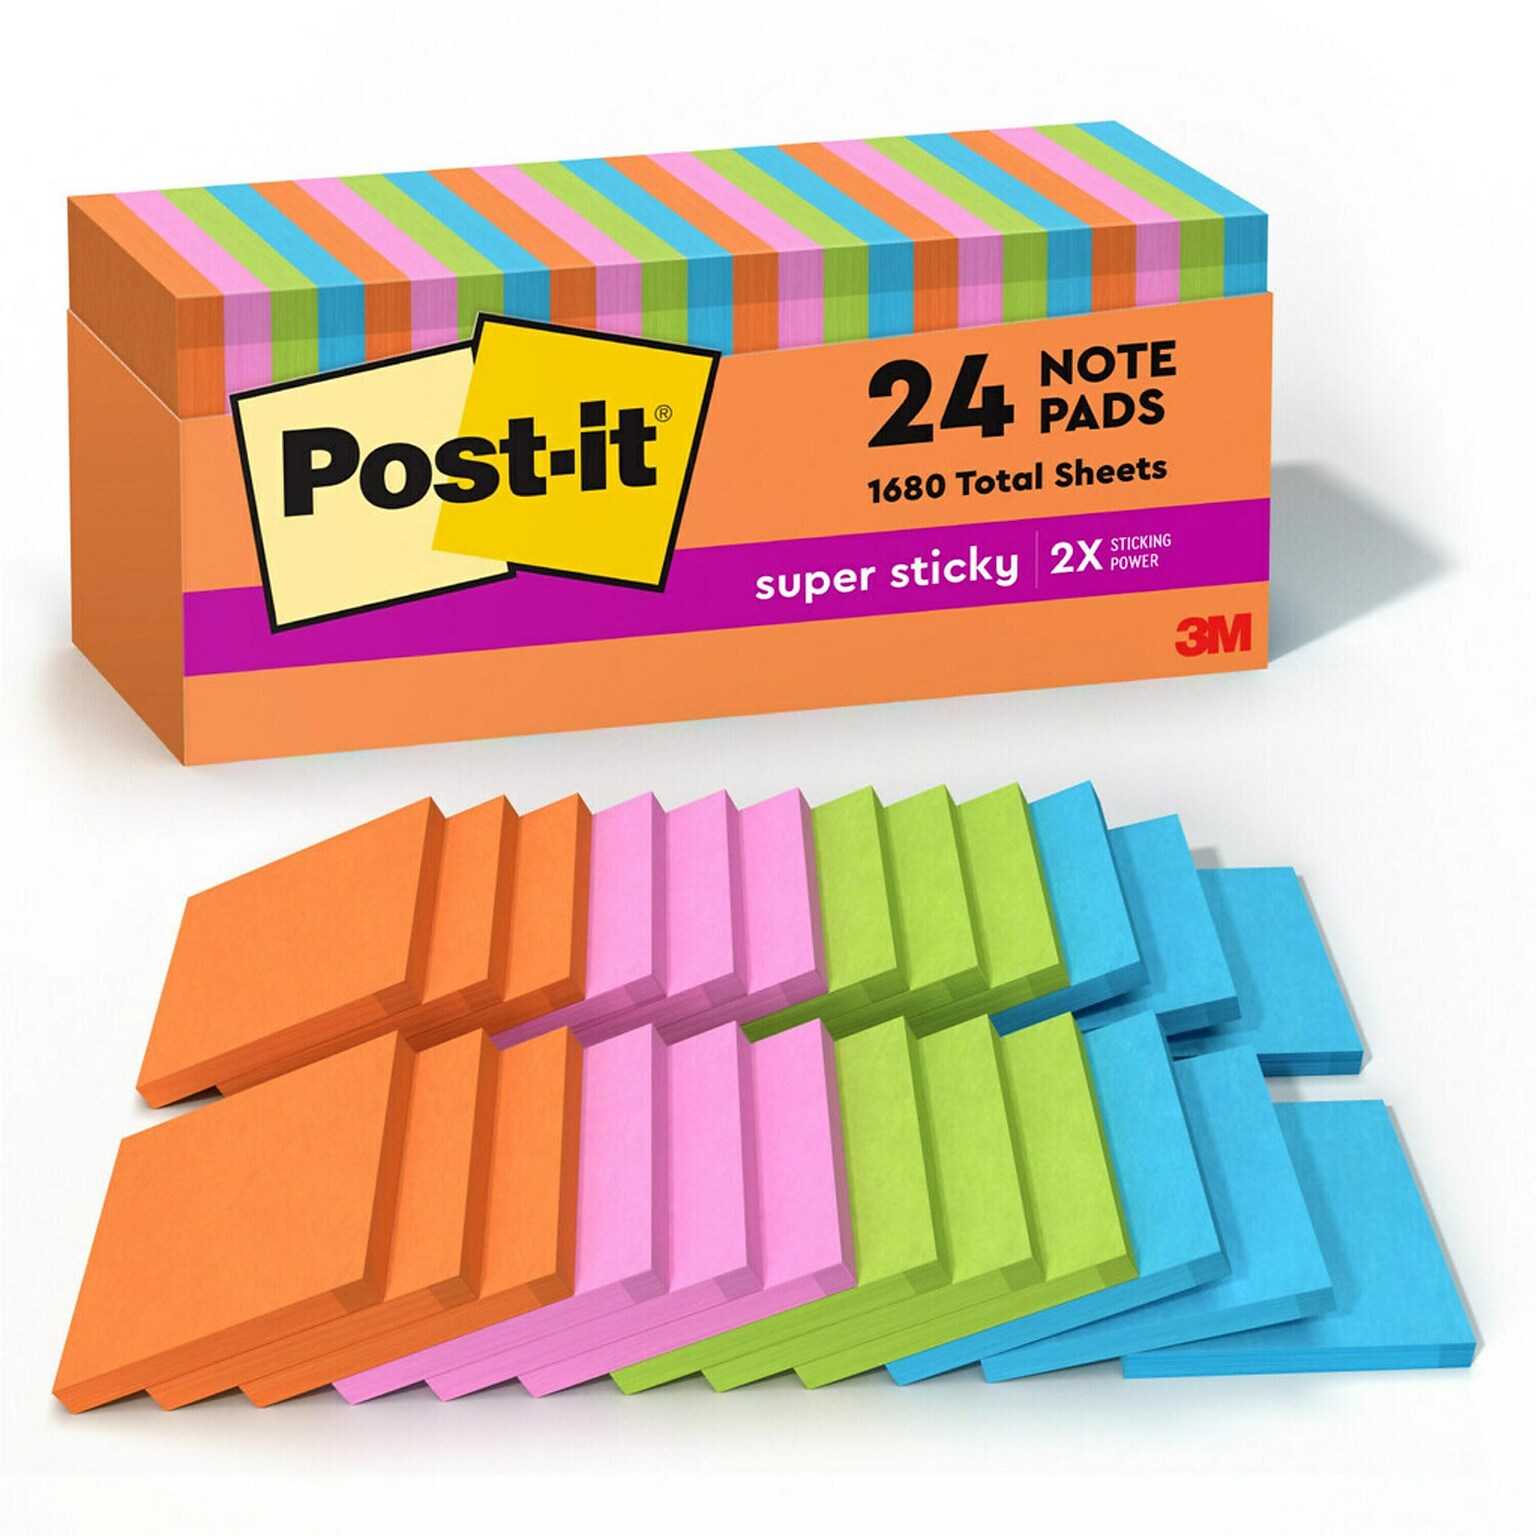 Post-it Super Sticky Notes, 3 x 3 in., 24 Pads, 70 Sheets/Pad, 2x the Sticking Power, Energy Boost Collection